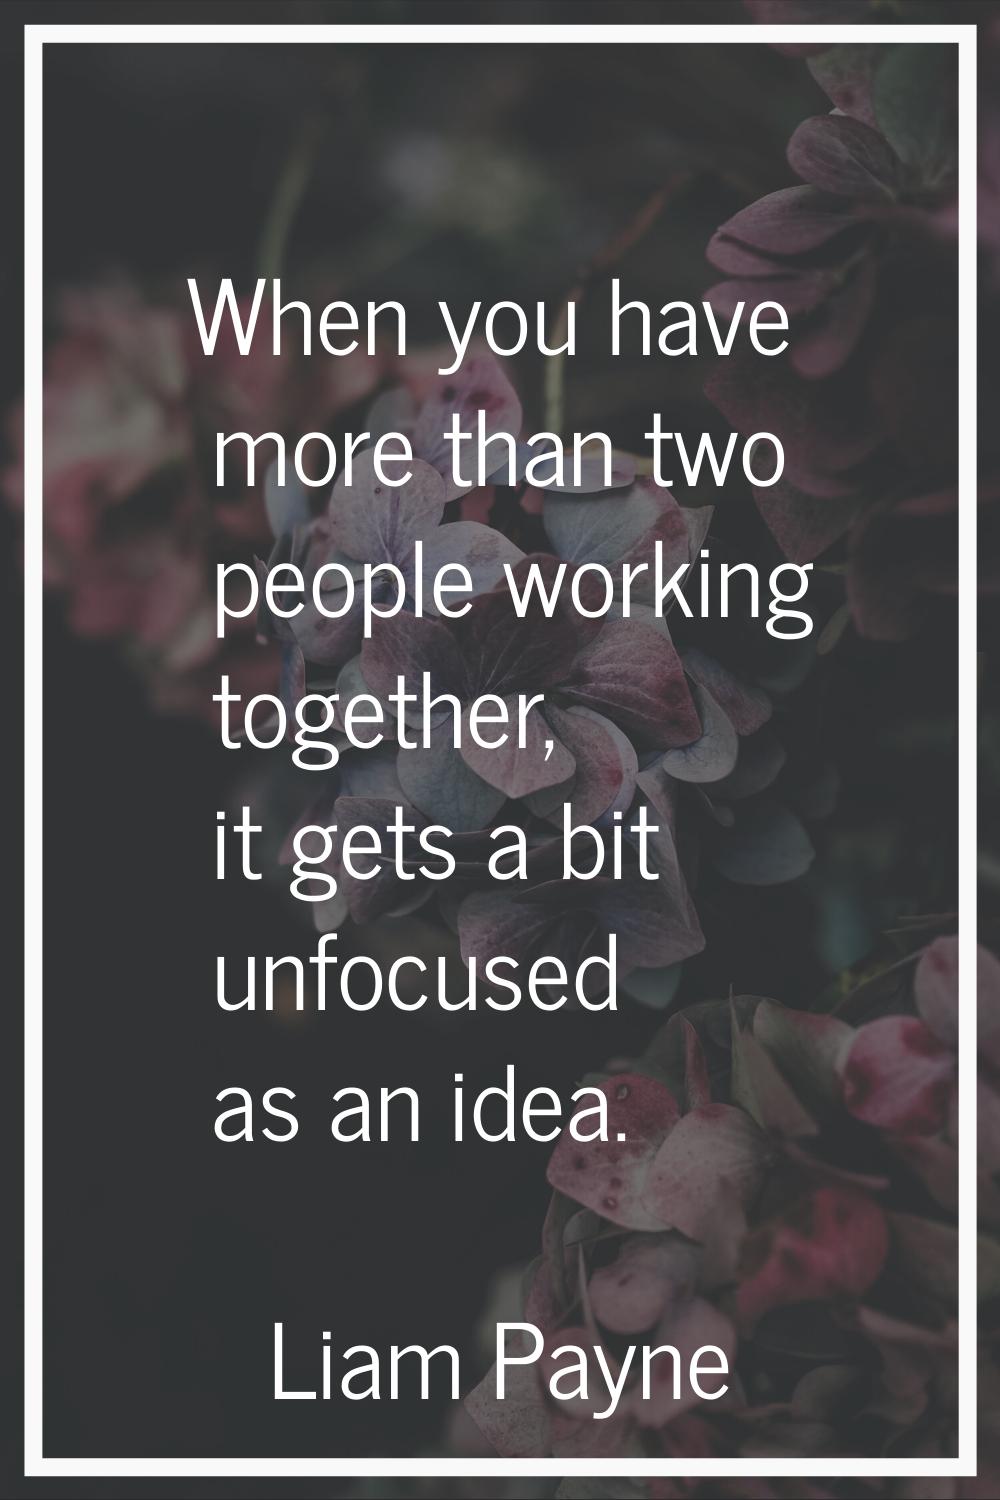 When you have more than two people working together, it gets a bit unfocused as an idea.